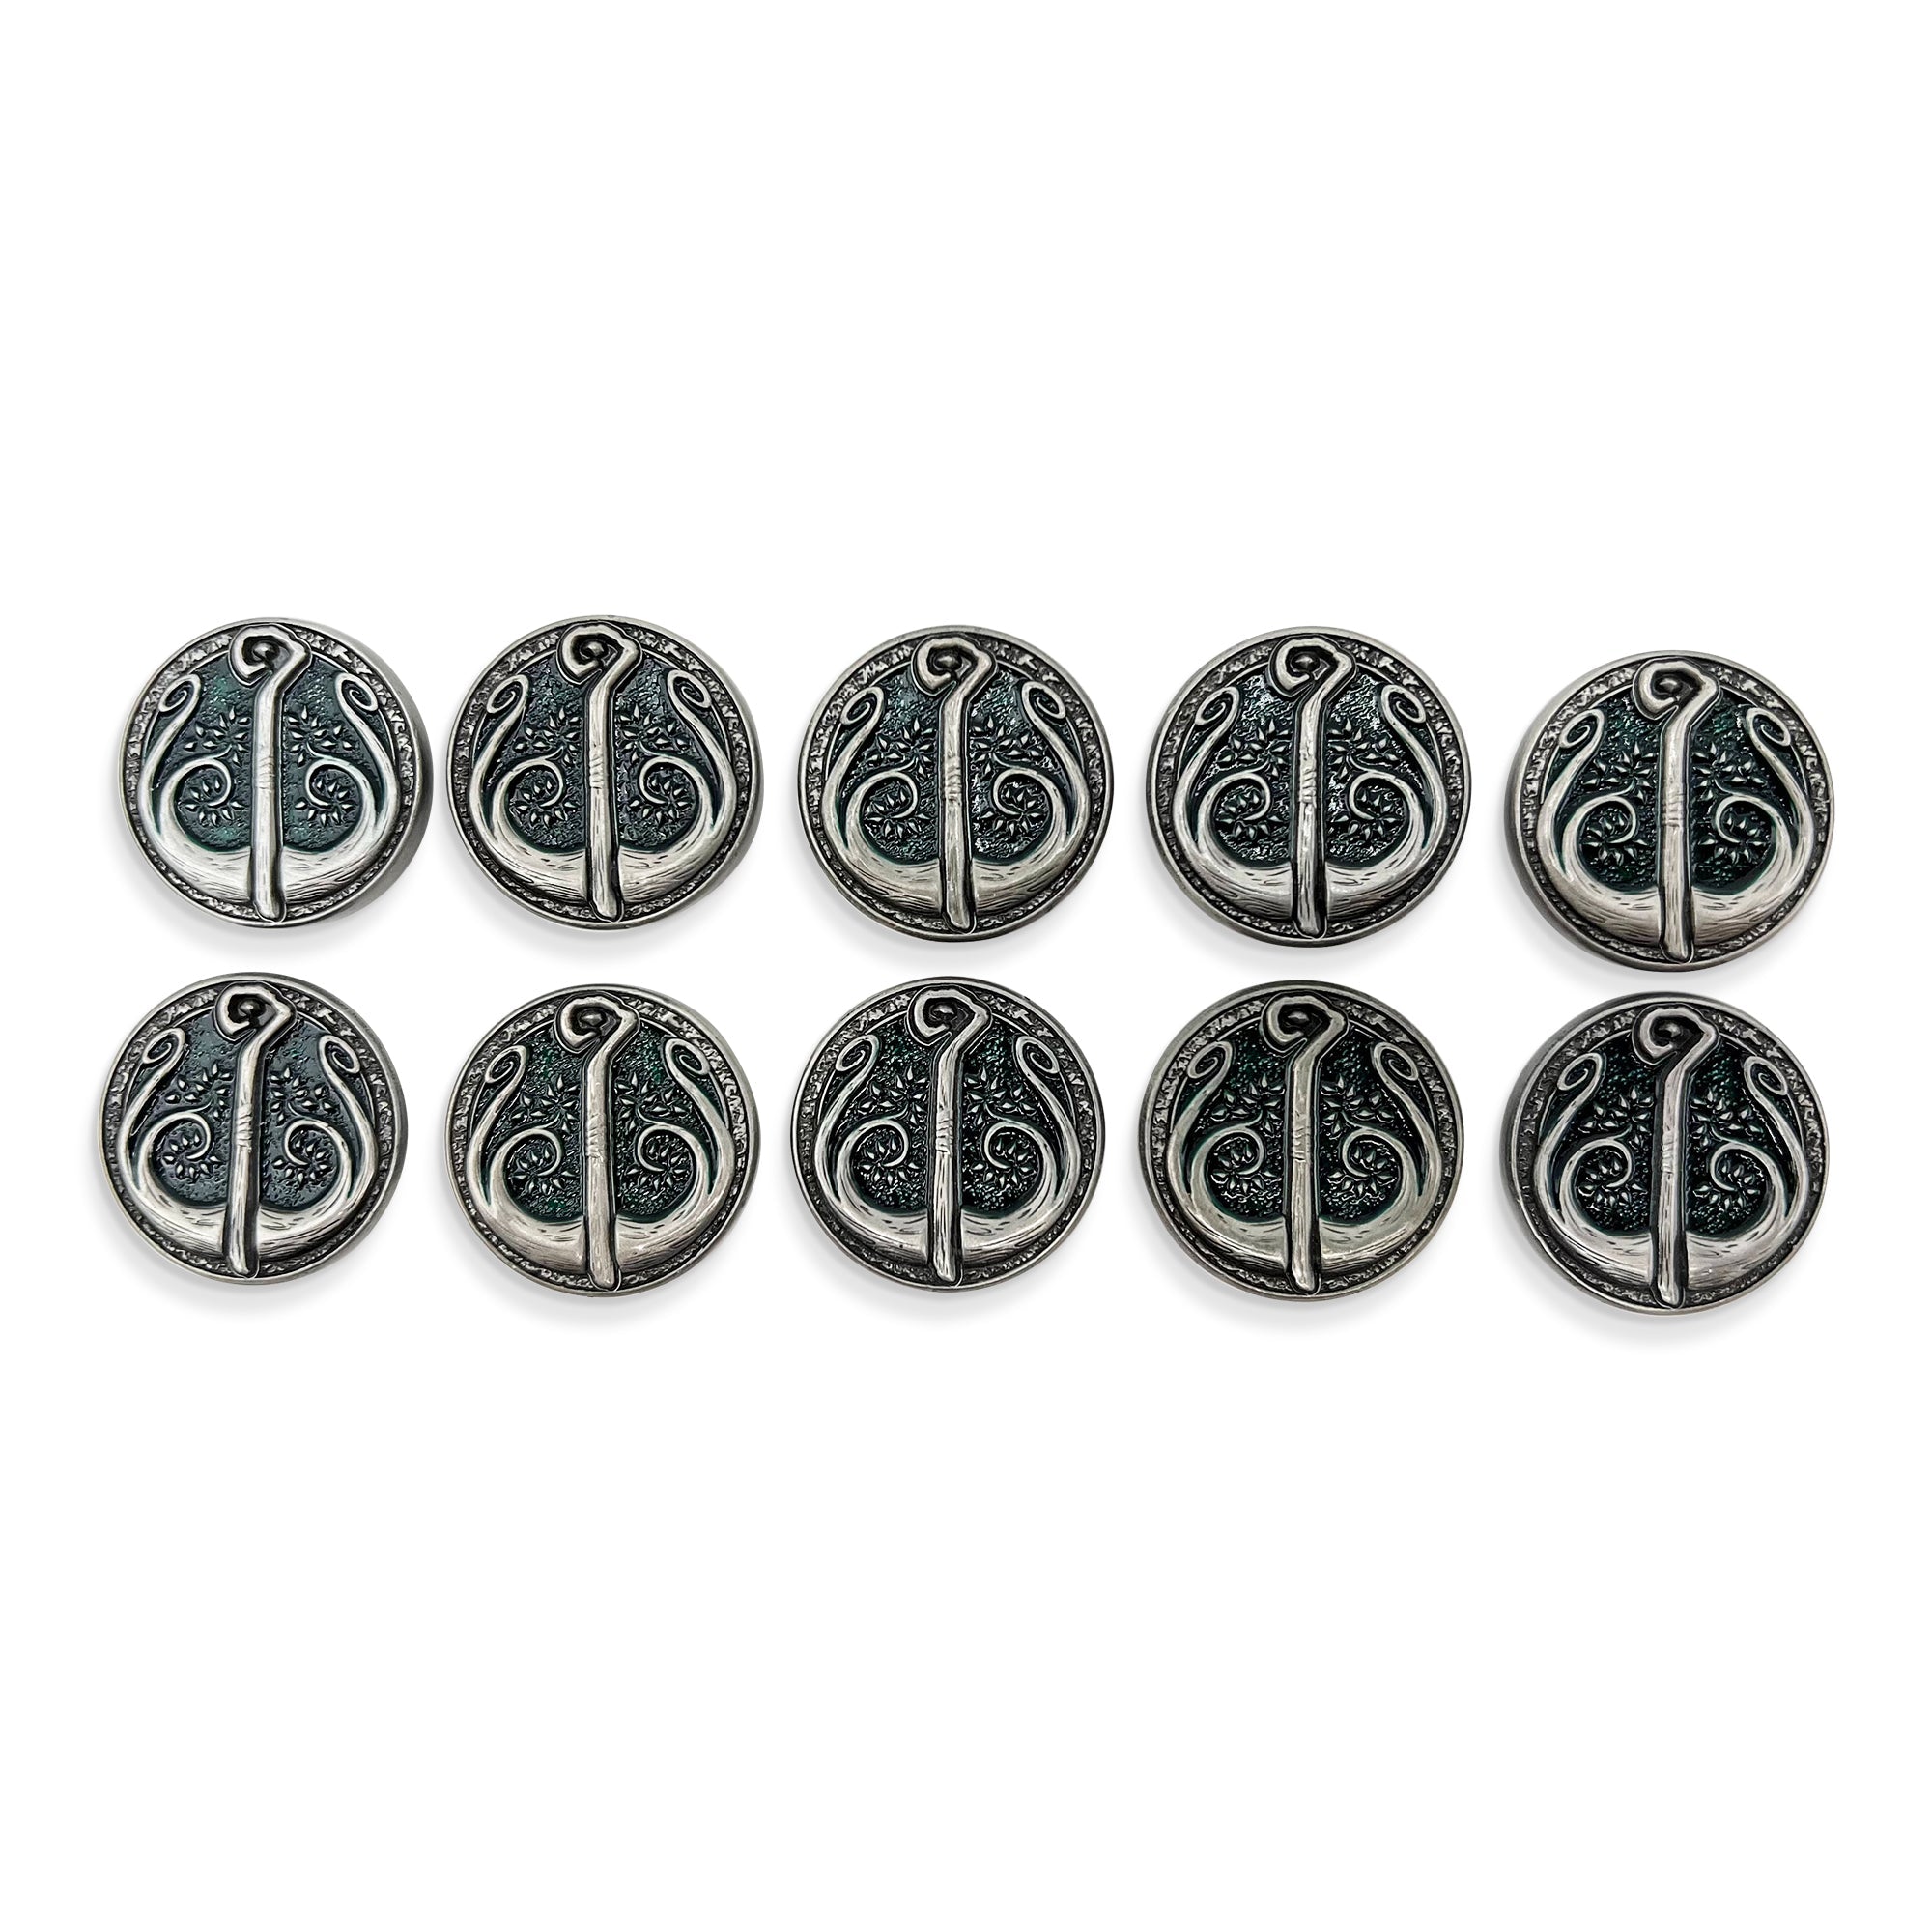 Profession Coins - Druid Metal Coins Set of 10 - NOR 03409